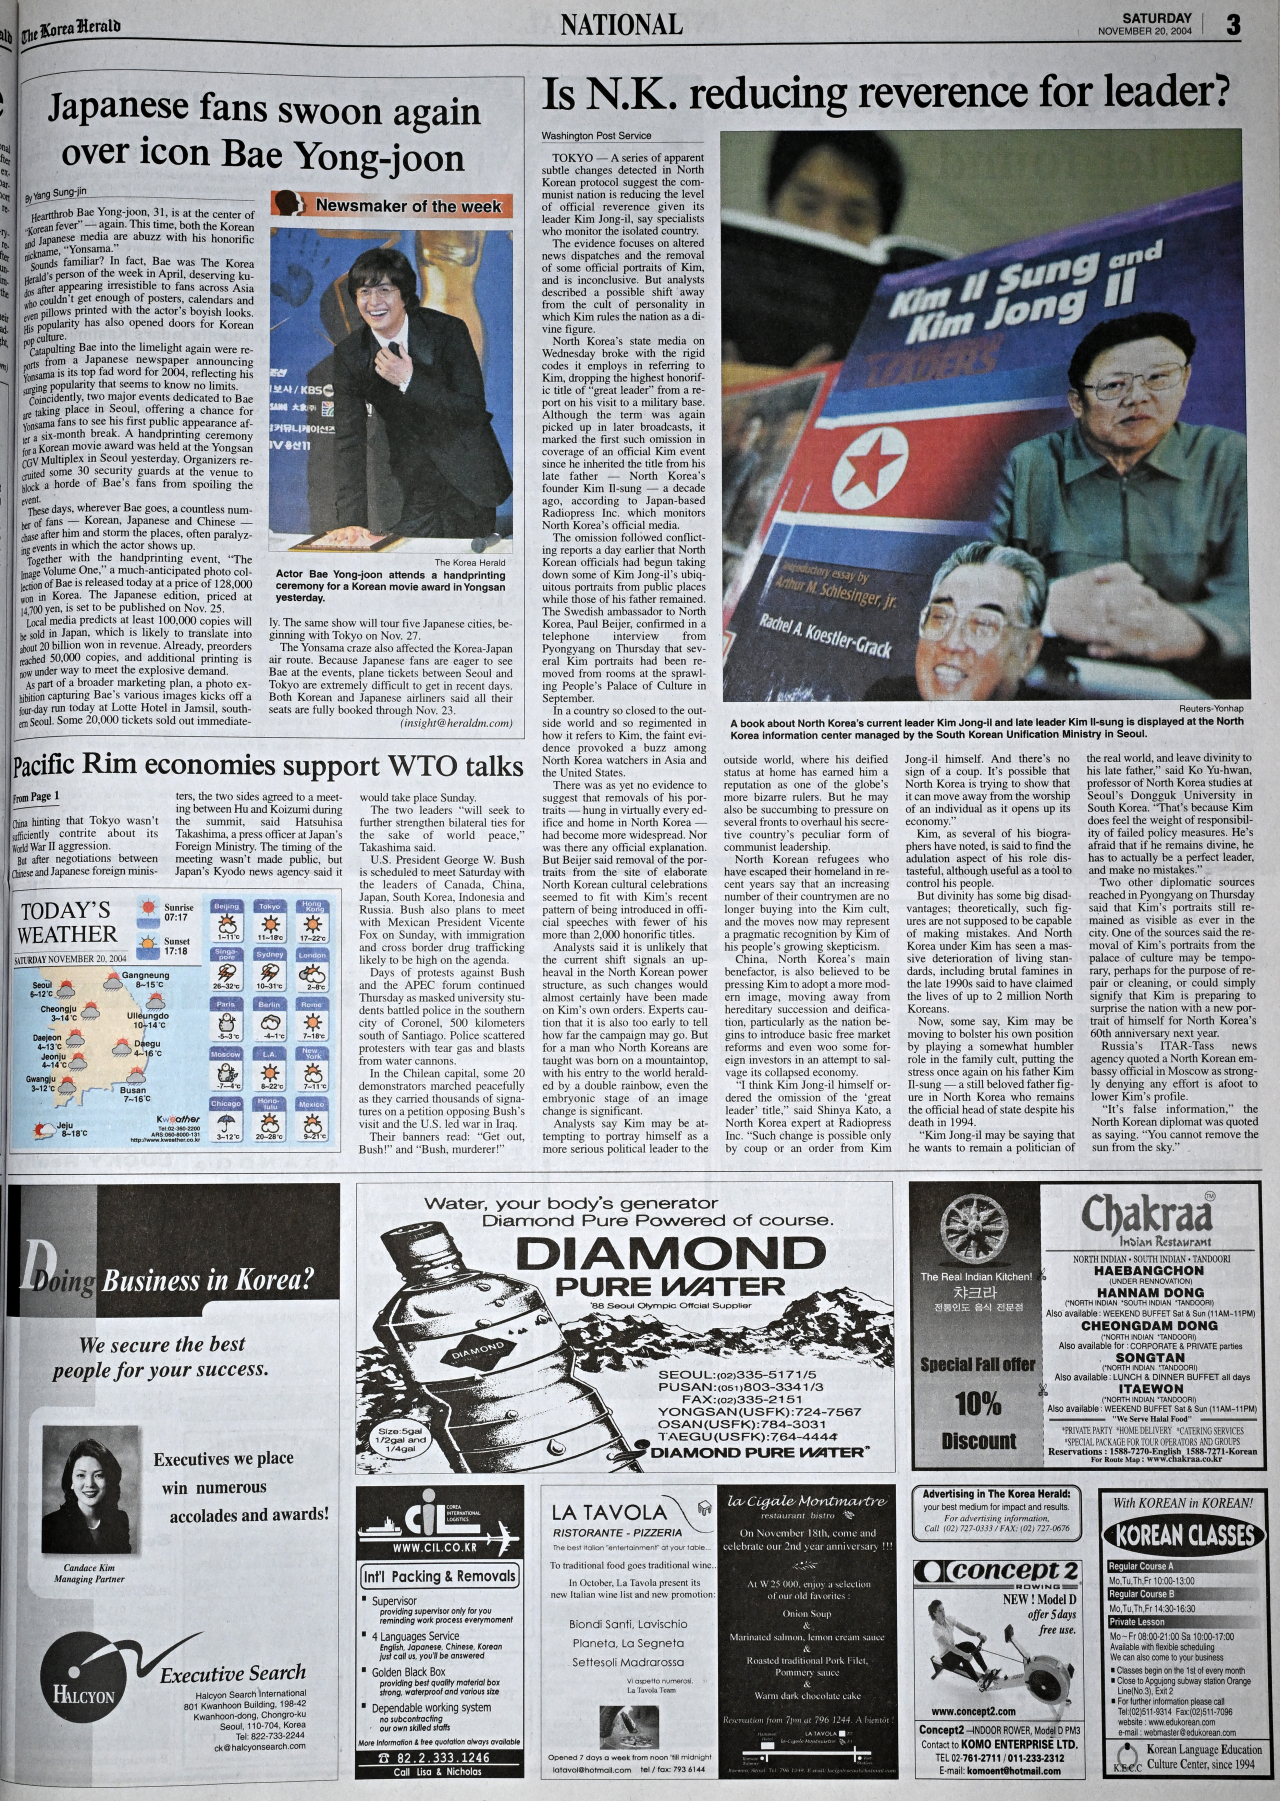 The Nov. 20, 2004 edition of The Korea Herald features an article about actor Bae Yong-joon's popularity in Japan. (The Korea Herald)